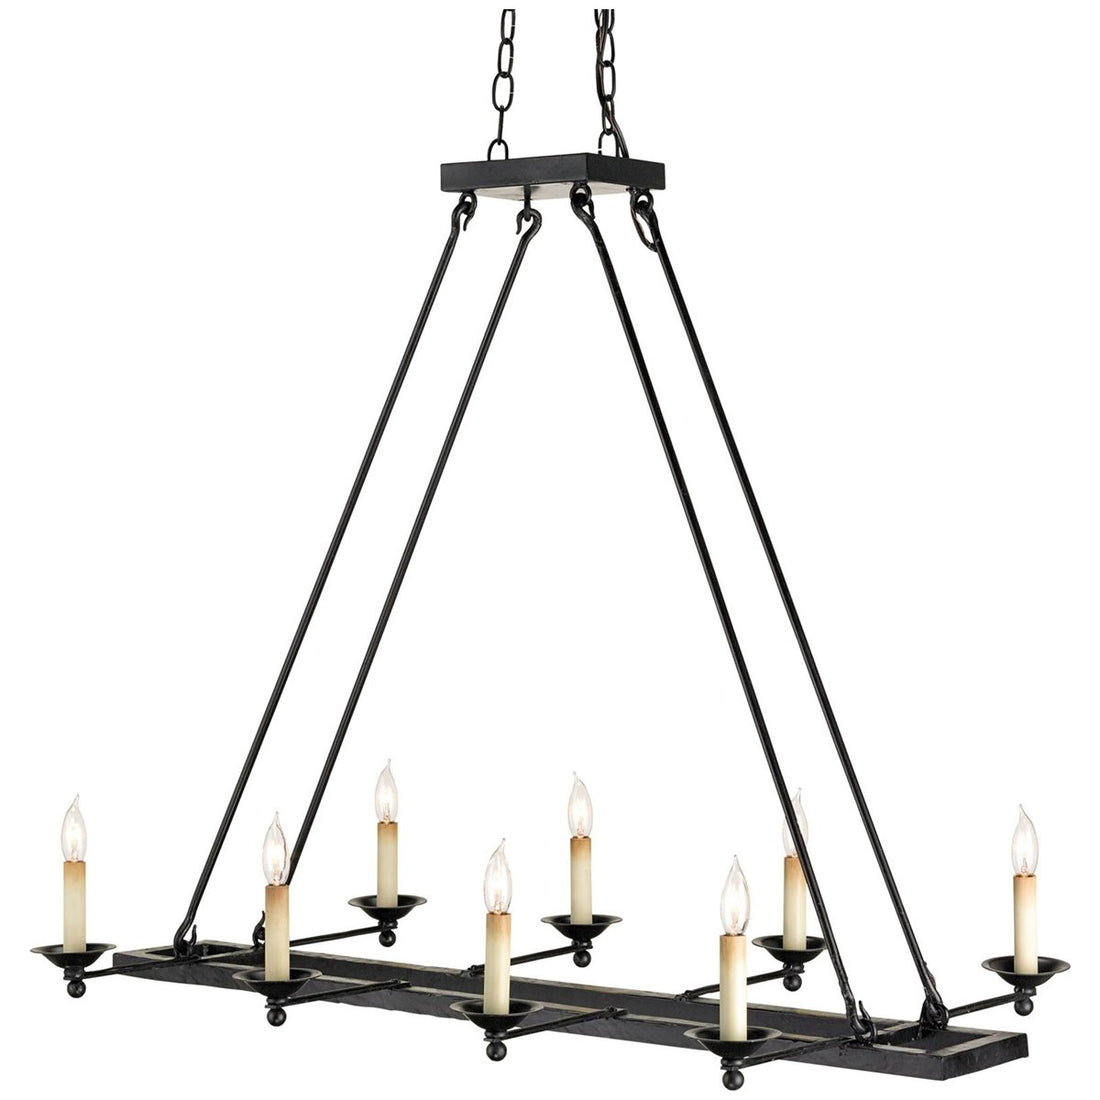 Currey and Company Houndslow Rectangular Chandelier